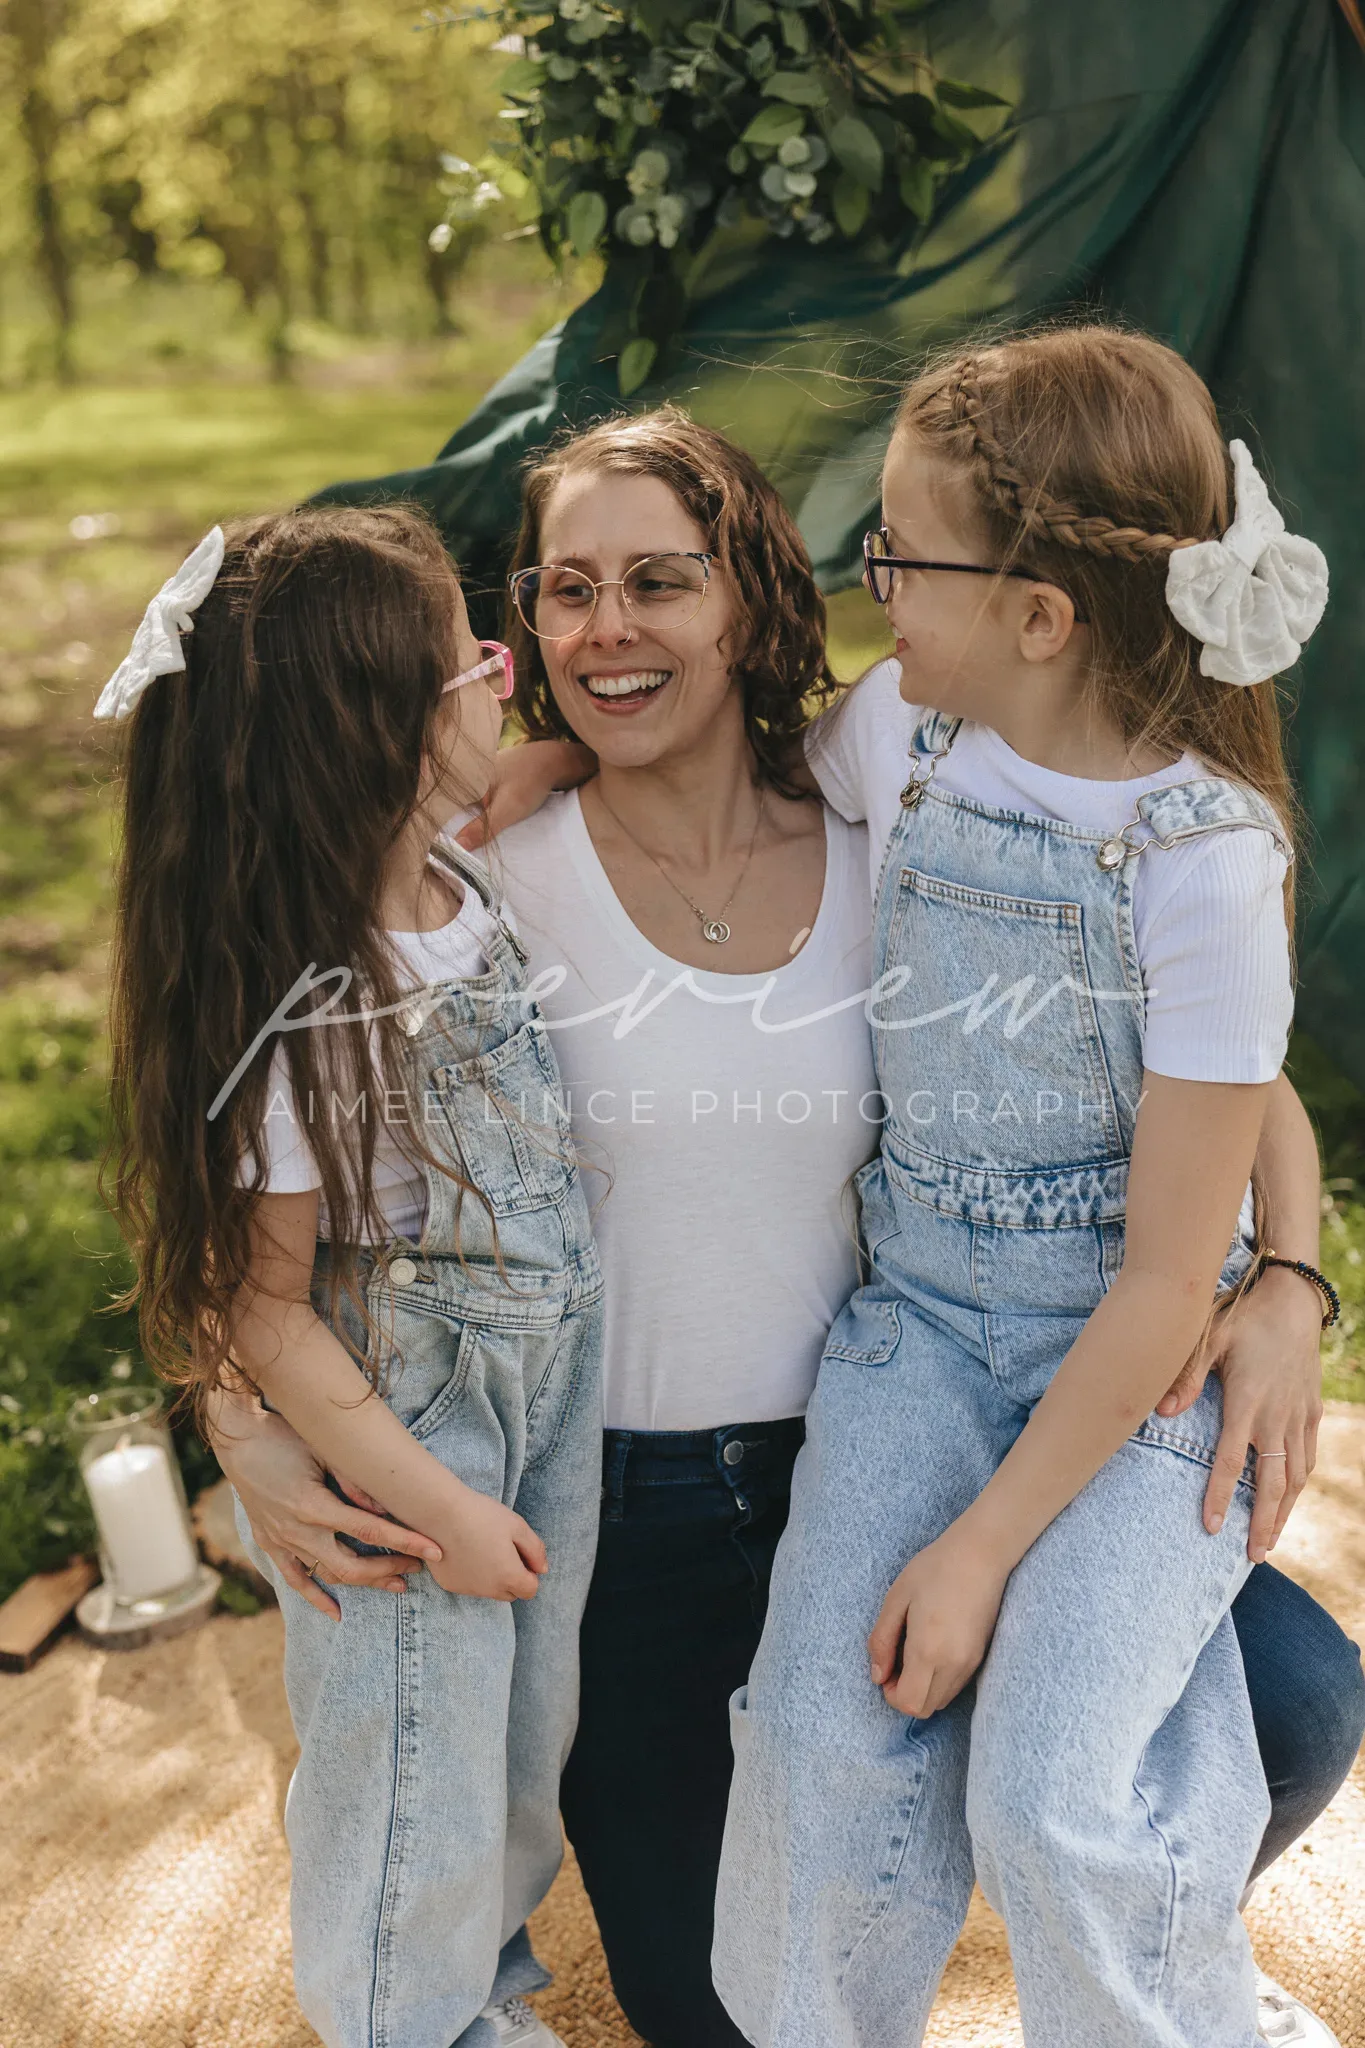 A joyful woman wearing glasses smiles, surrounded by two young girls in denim overalls. they are outdoors, near a tent under trees, with sunlight filtering through leaves. the woman embraces the girls as they share a happy moment.